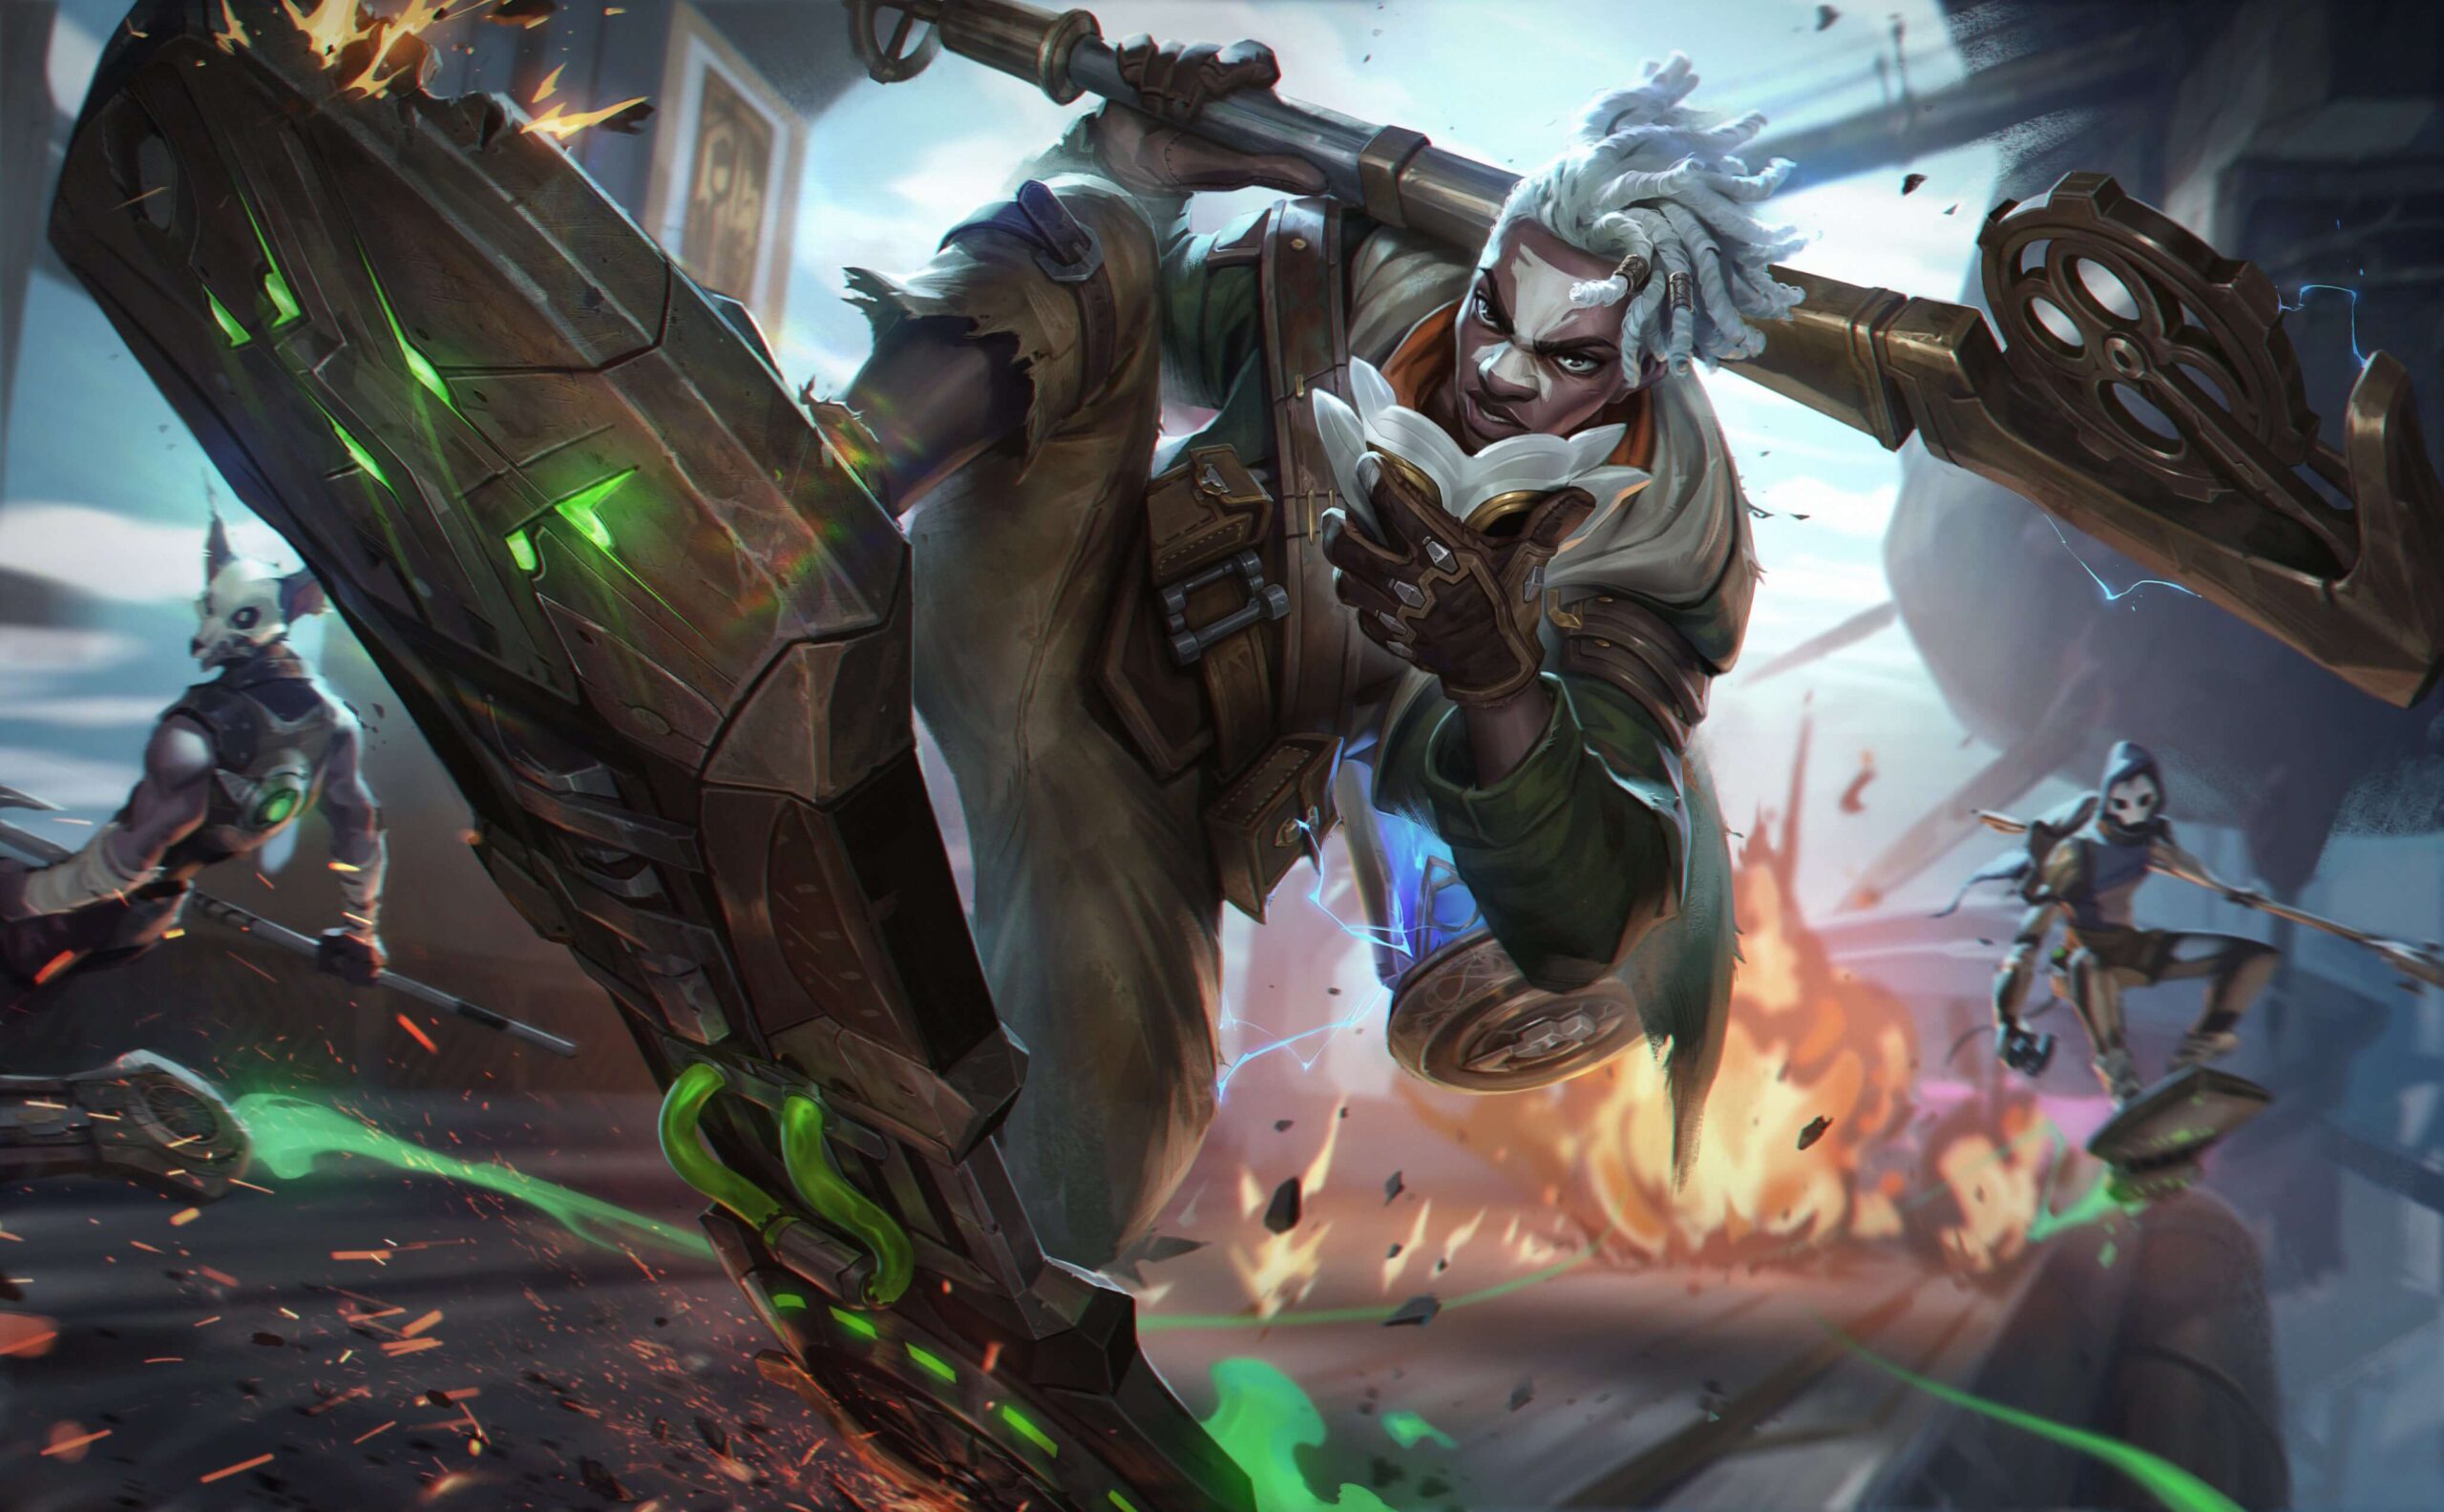 Ekko is flying a hoverboard in Piltover with the other Firelight gang members